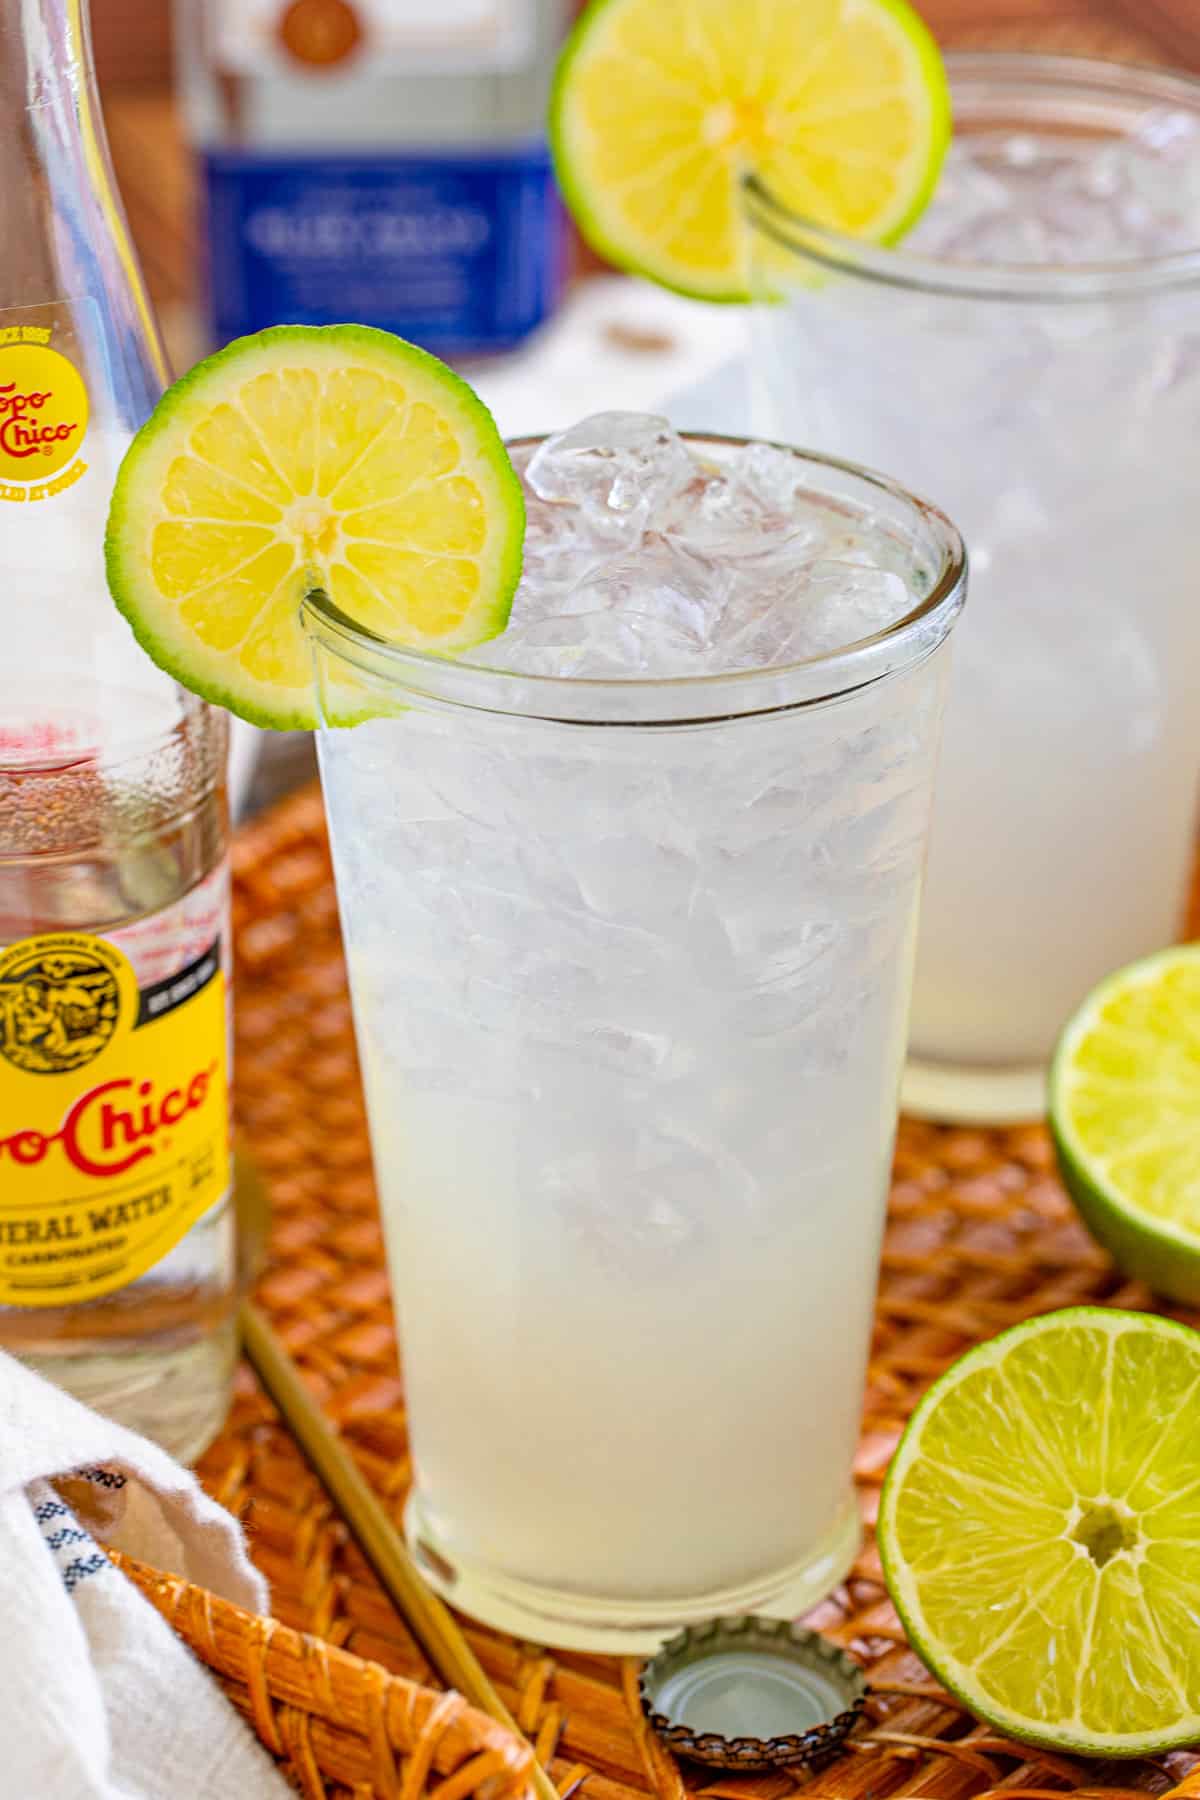 Ranch water drink with tequila, fresh lime, and Topo Chico on straw tray.